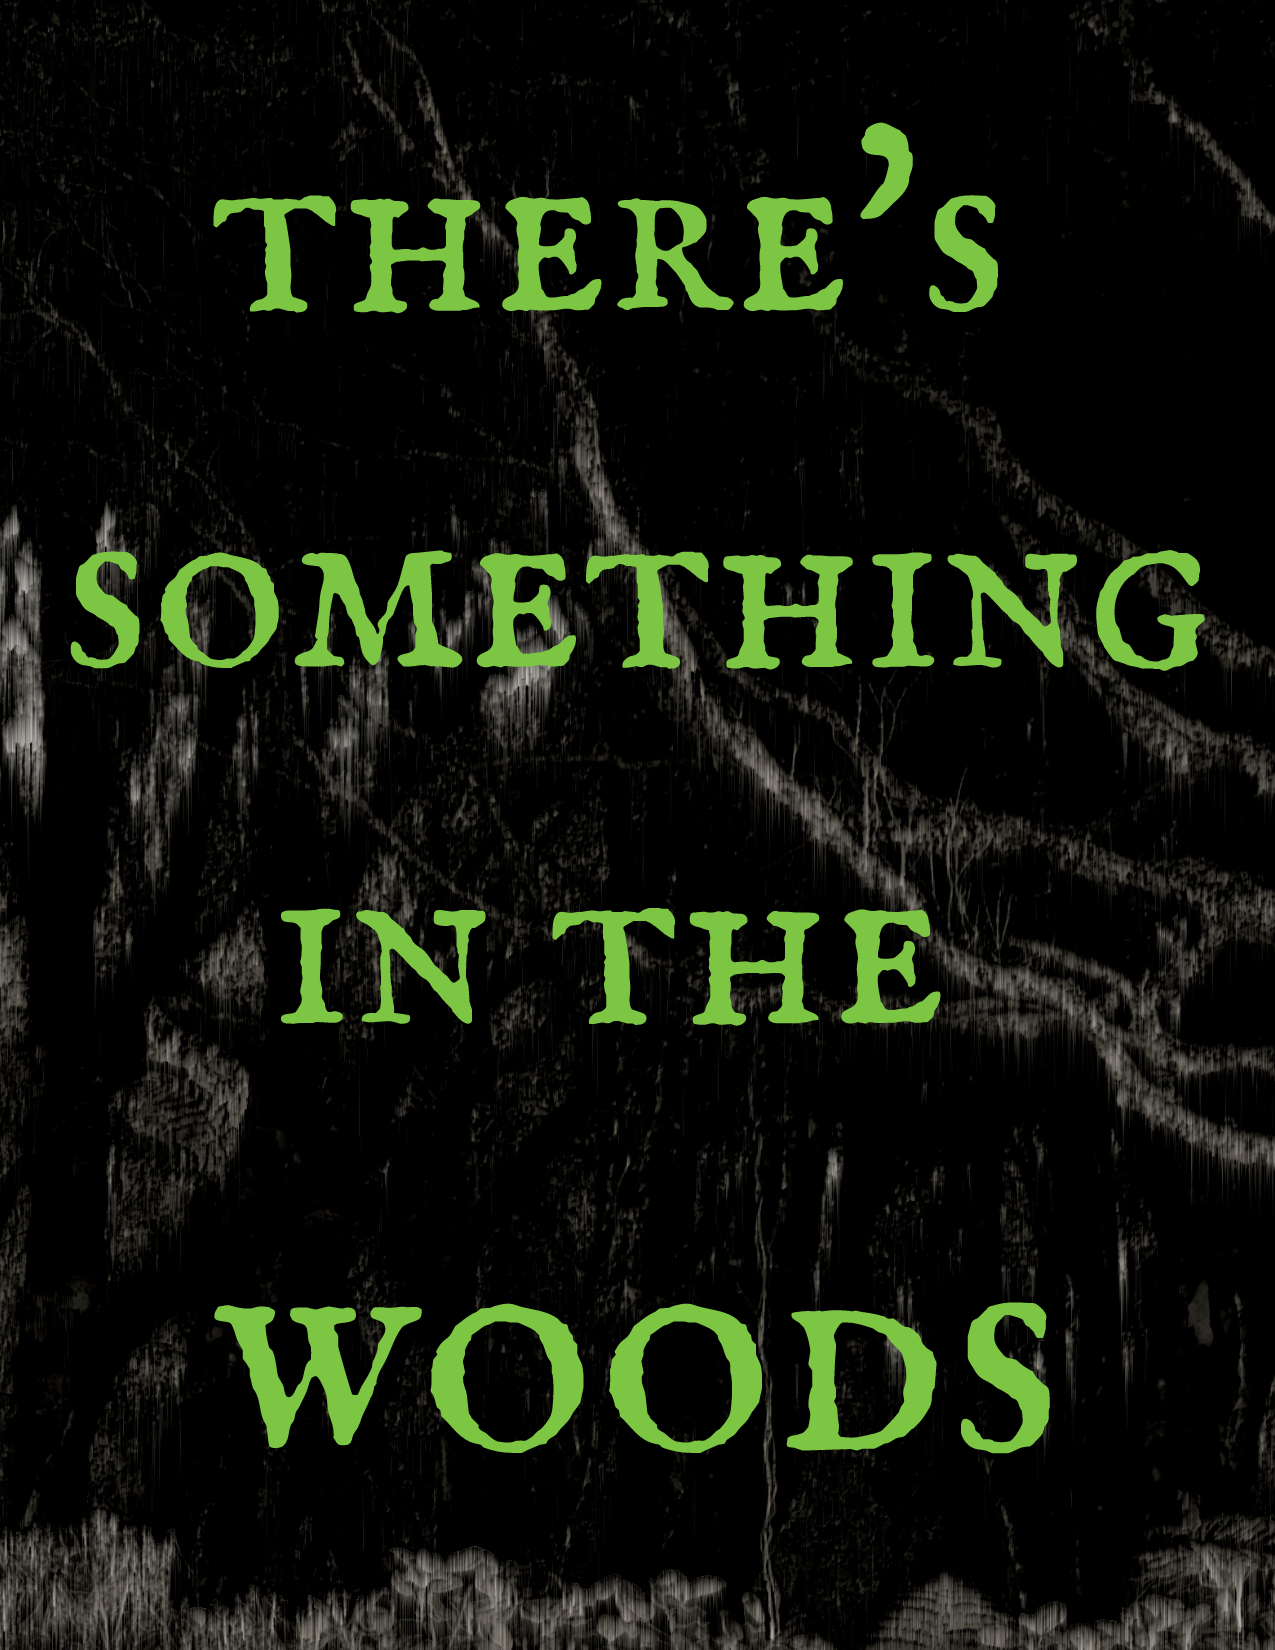 There's something in the woods